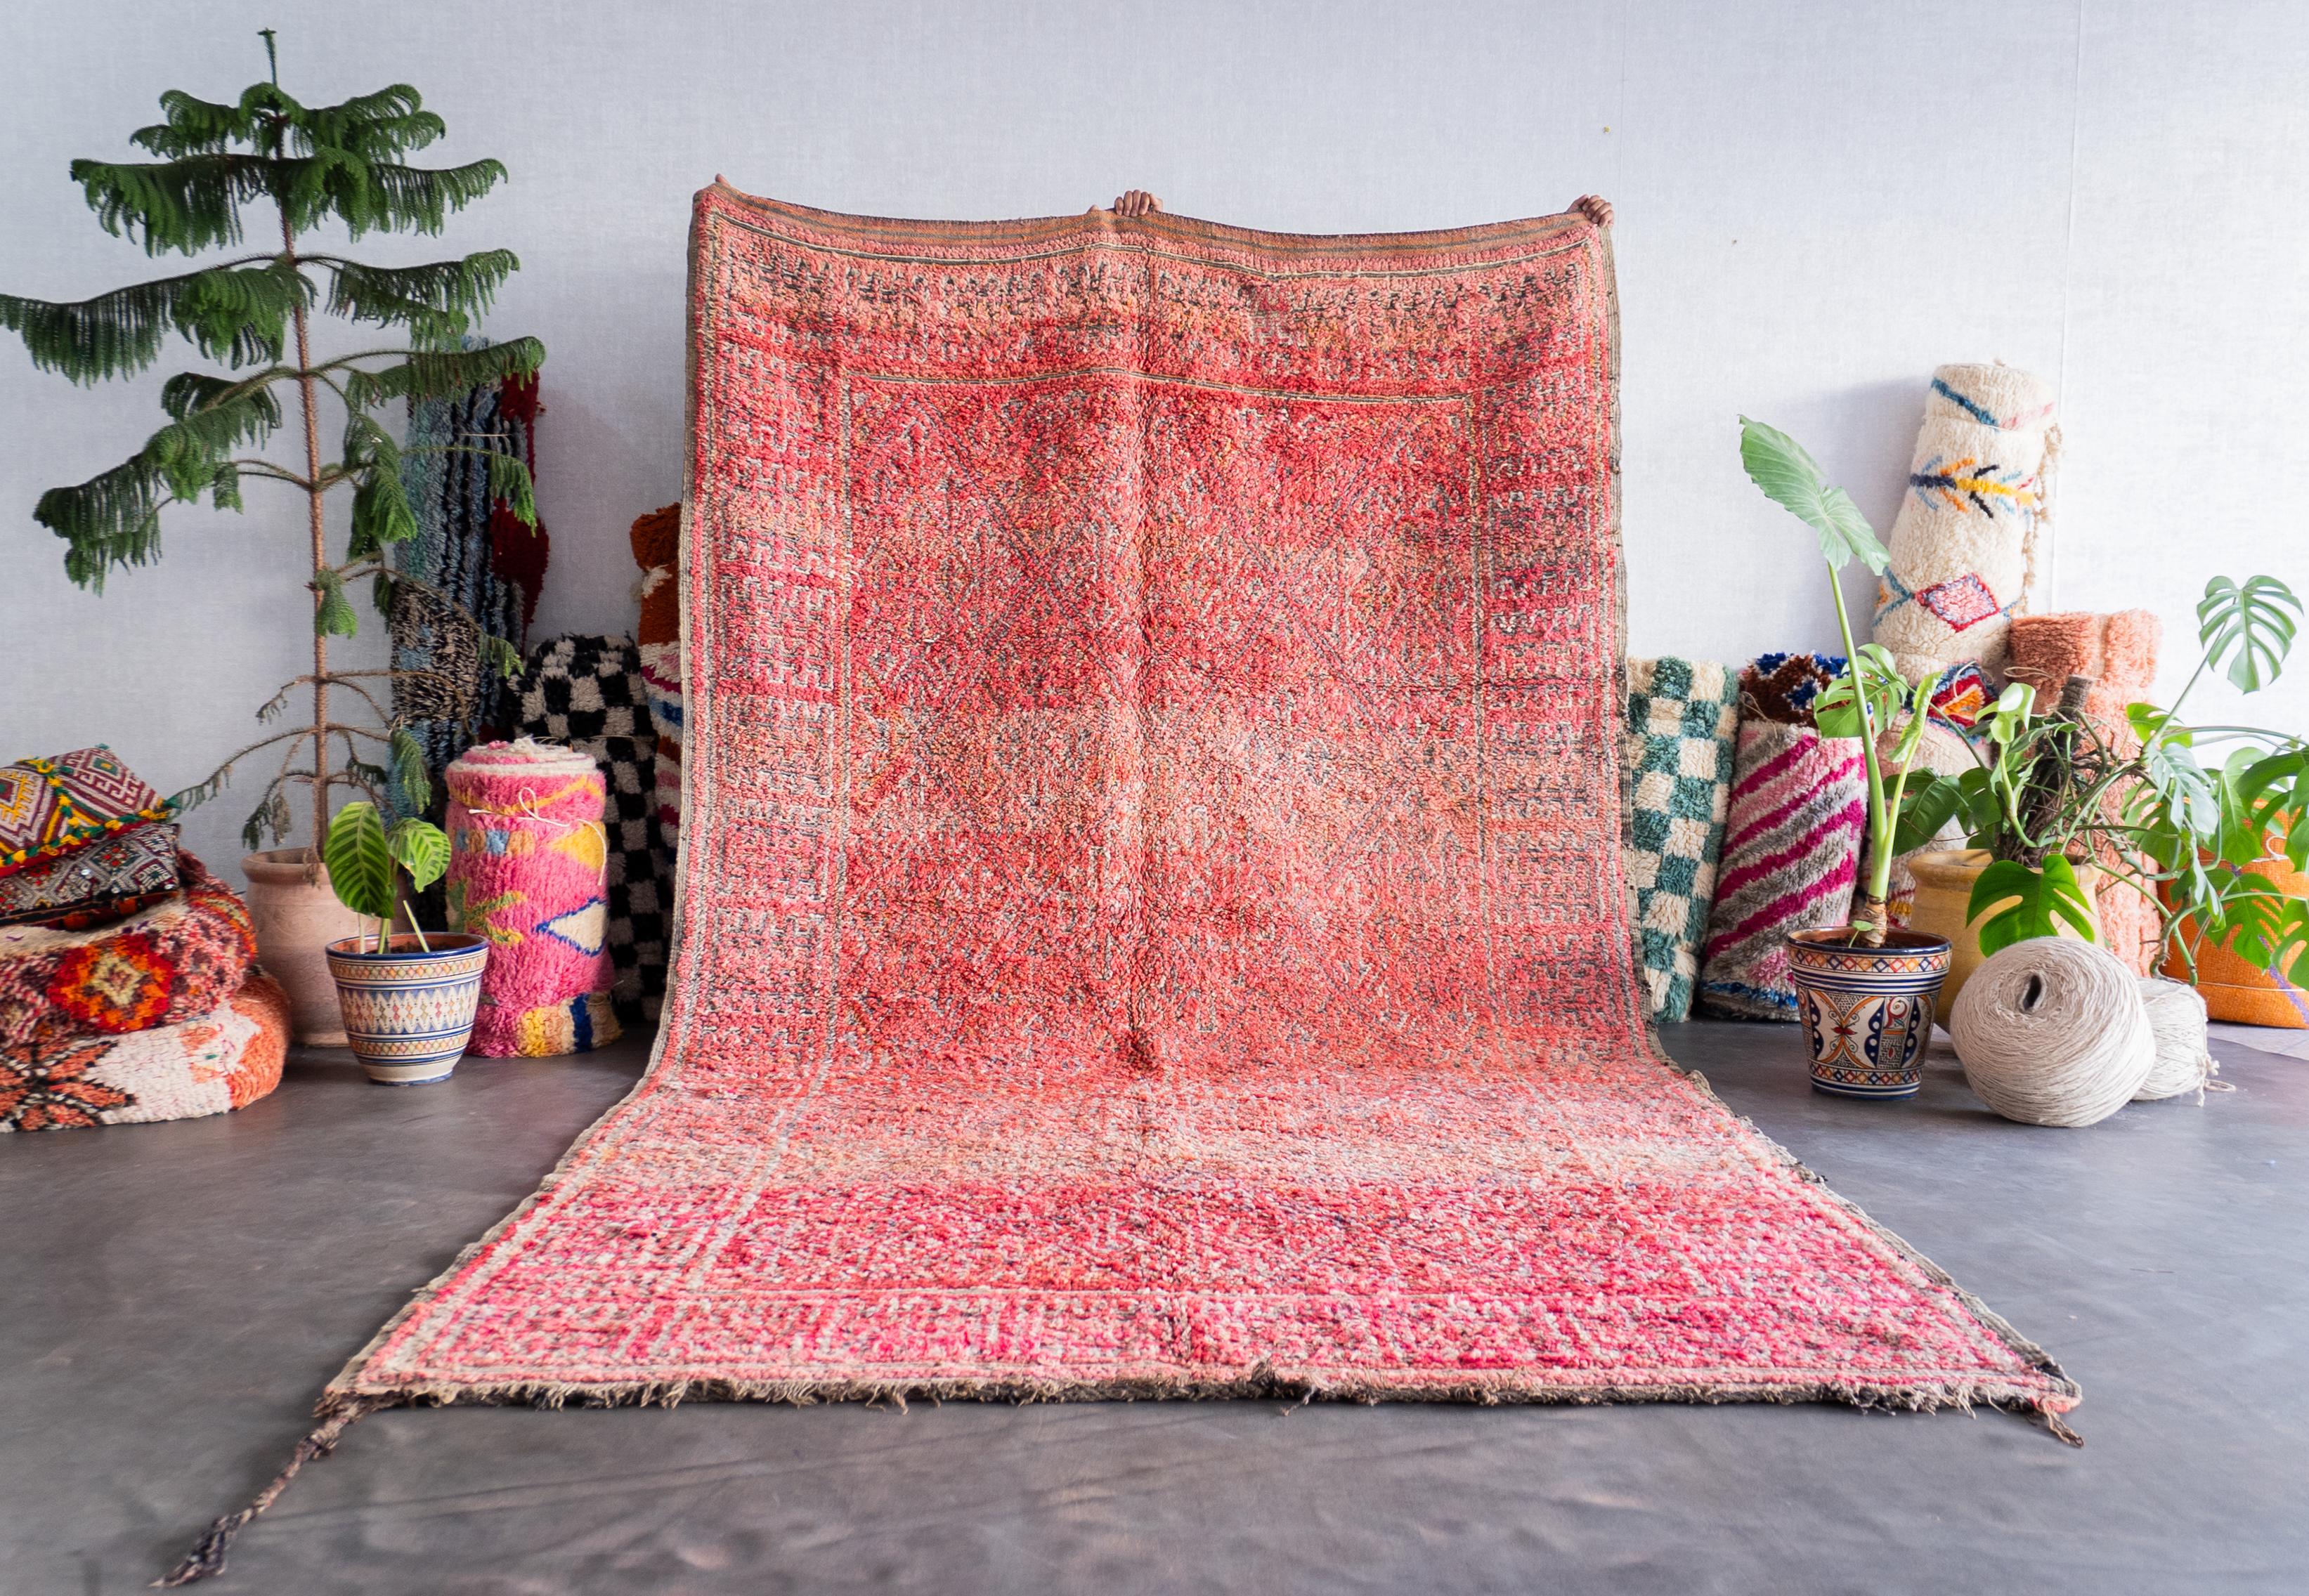 Uncover the rich heritage woven into our Moroccan vintage rug. Handmade by skilled artisans using time-tested techniques, each Berber rug is a unique narrative, echoing the cultural tapestry of Morocco. With intricate geometric patterns and a warm